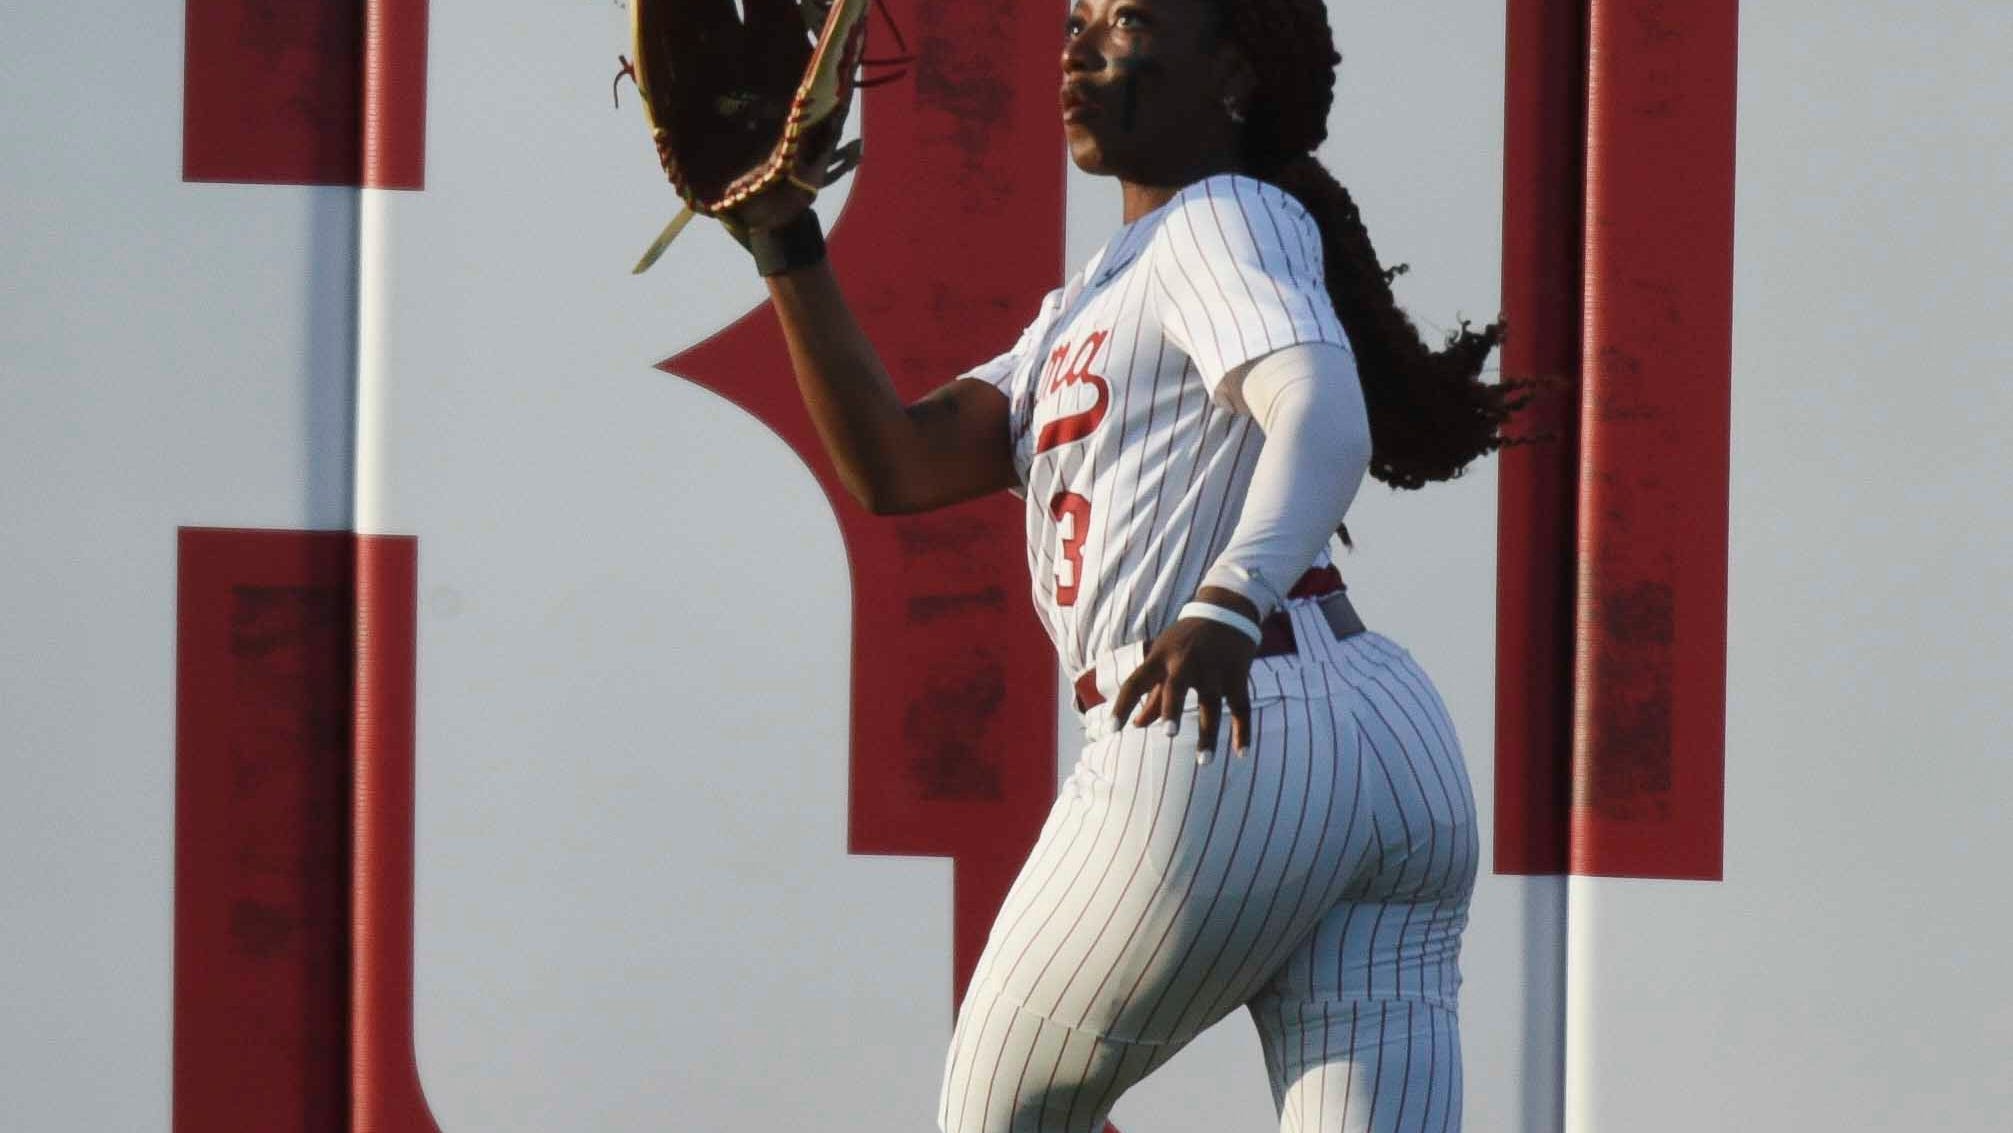 Alabama softball live score updates from home SEC series vs. Tennessee